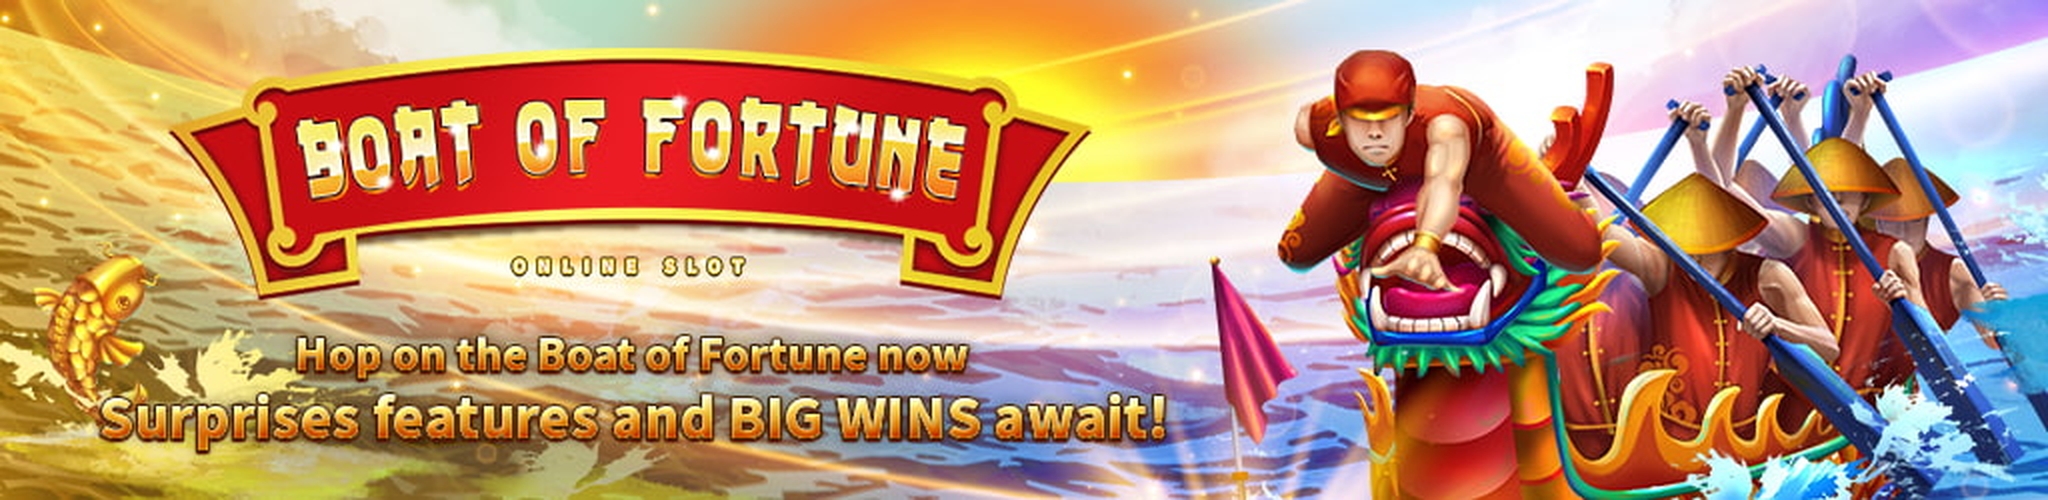 The Boat of Fortune Online Slot Demo Game by Microgaming